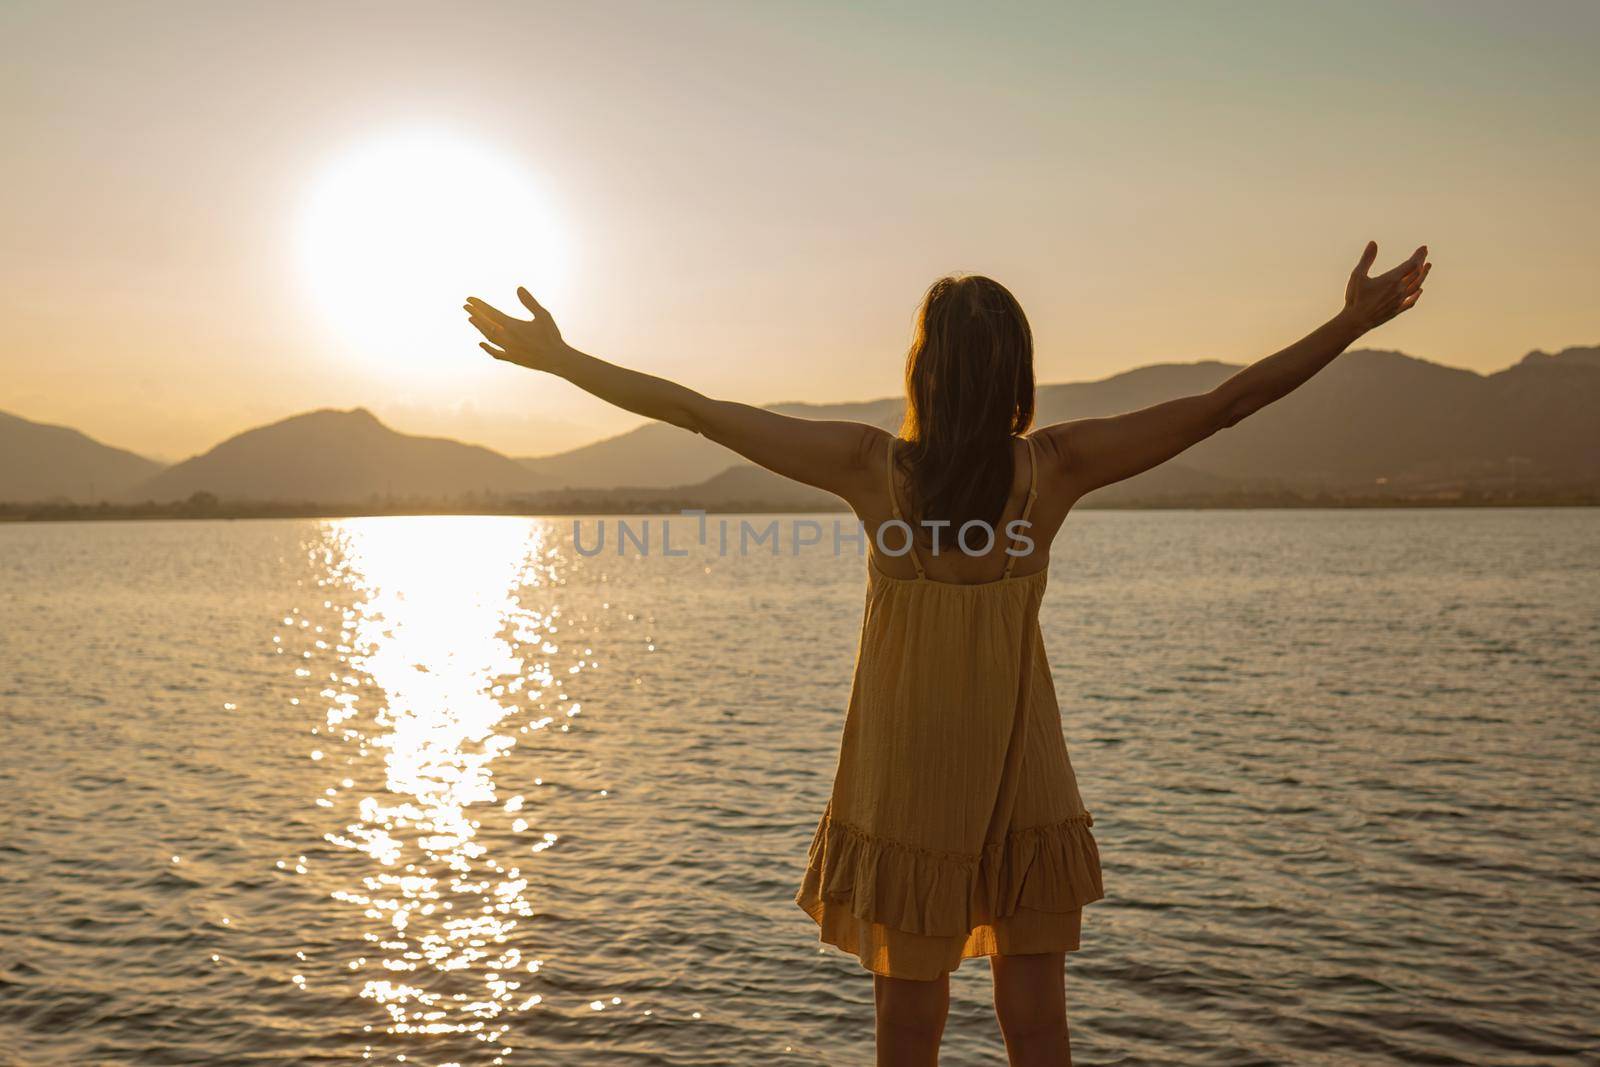 Lonely pensive woman with open arms in adoration of sun reflecting in ocean sea water at sunset or sunrise. Concept of spirituality and serenity in contact with nature to find yourself and one's soul